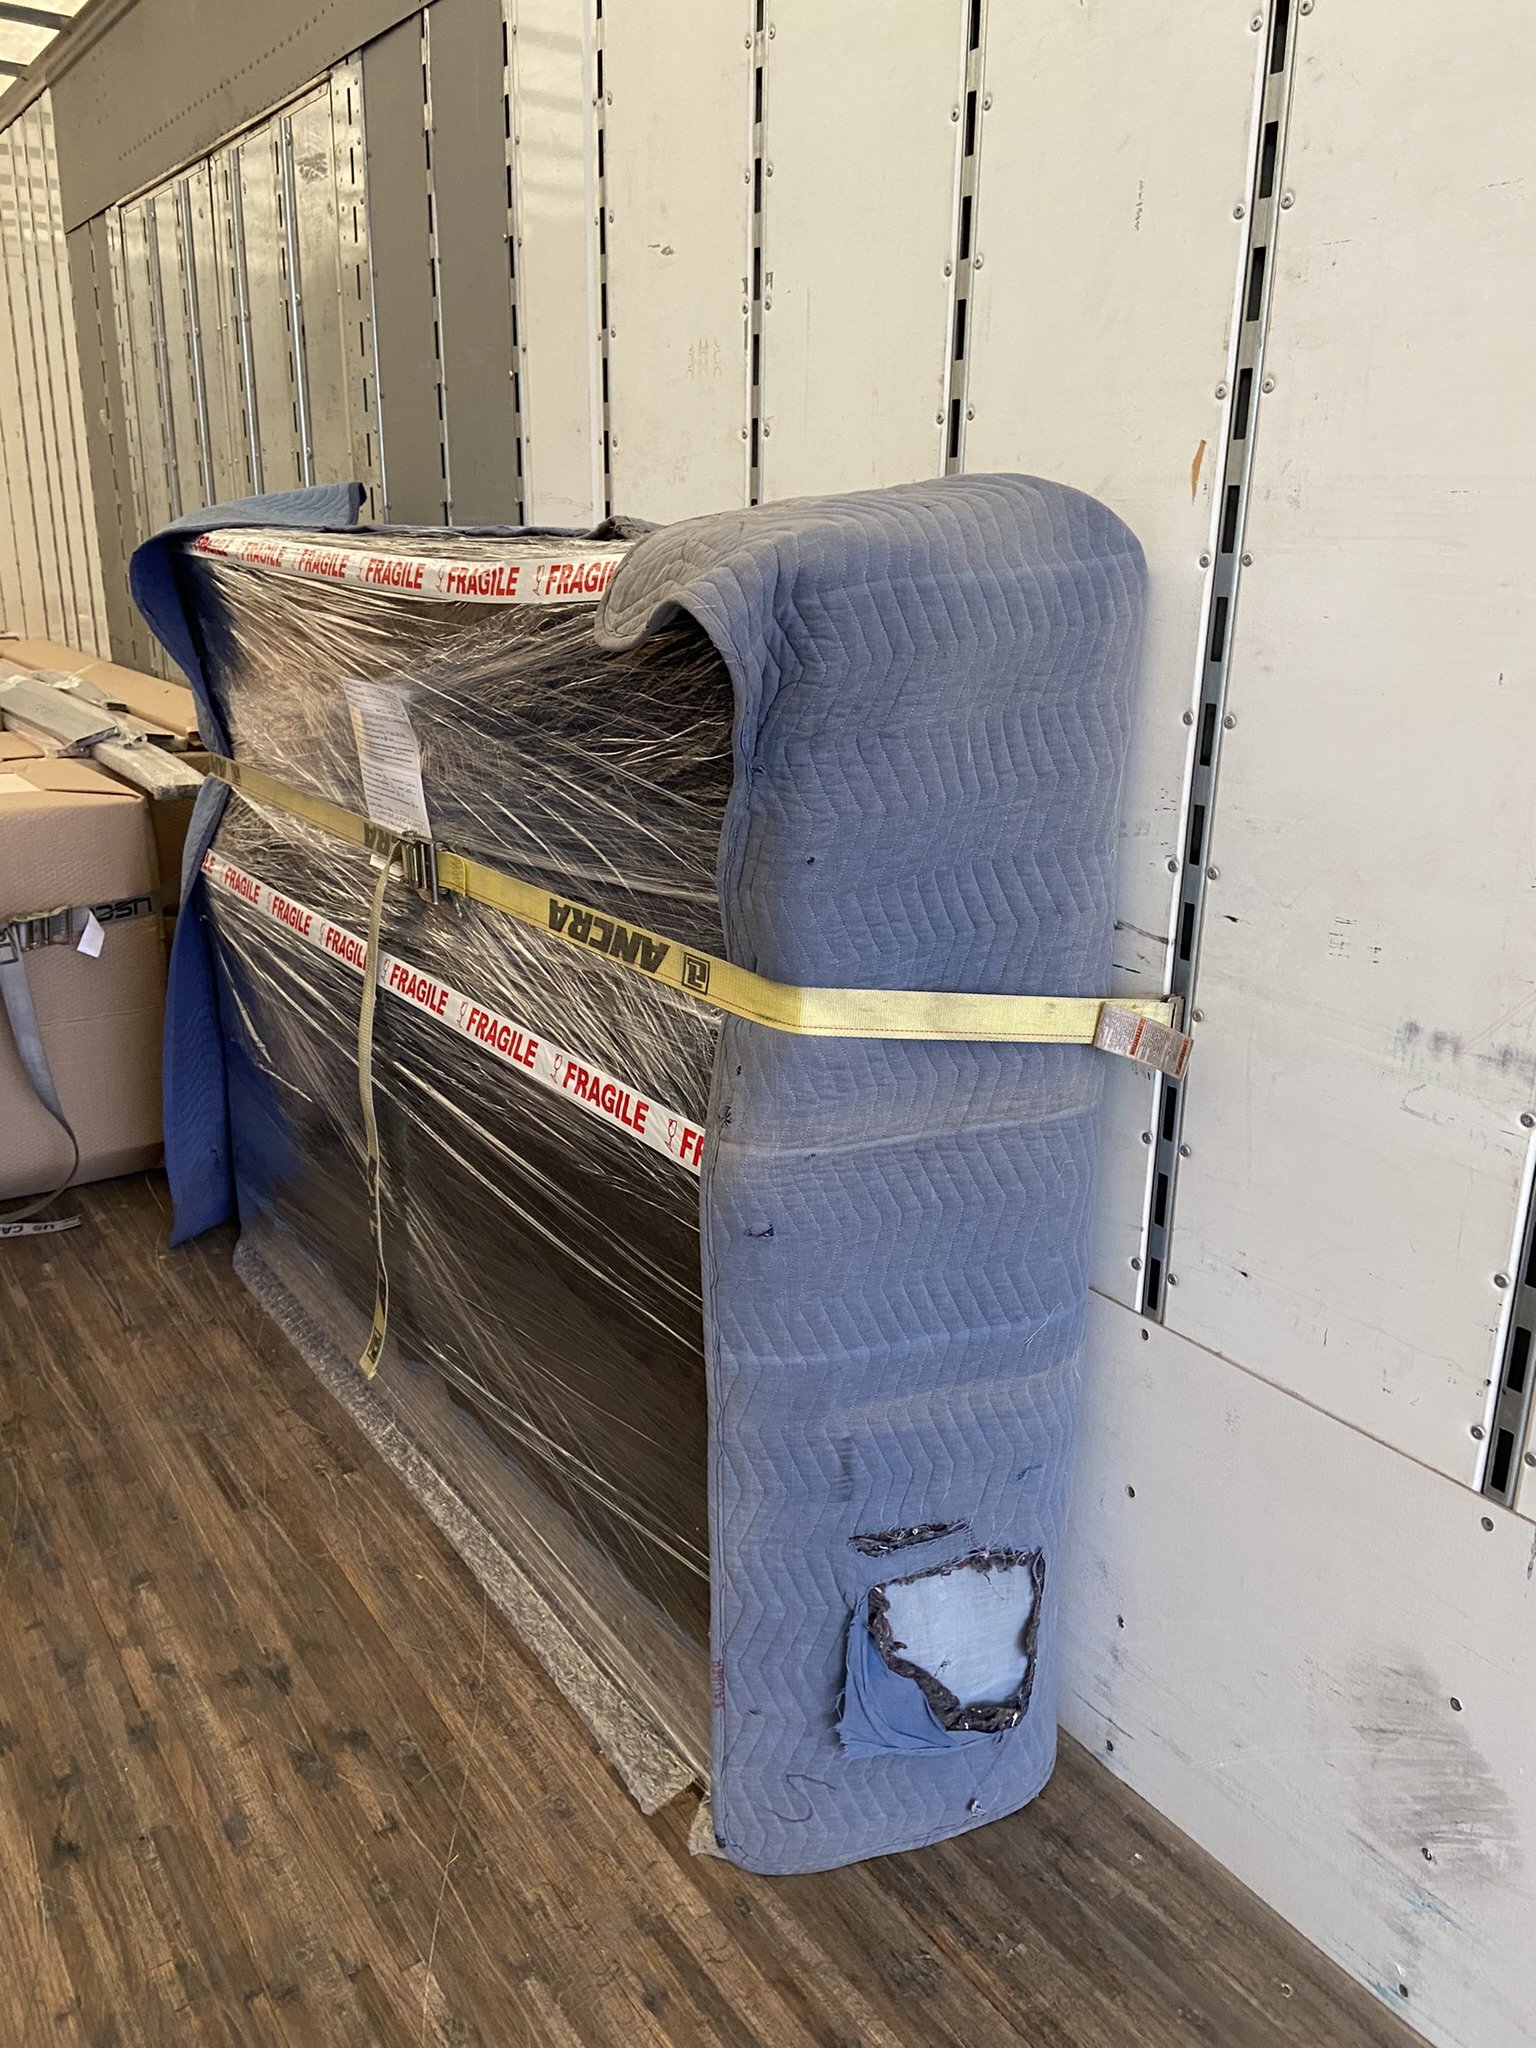  Securely fastened, this piece is ready to begin the trip to it's final destination. We use carriers that will deliver directly to the drop-off point. No intermediate distribution centers. 